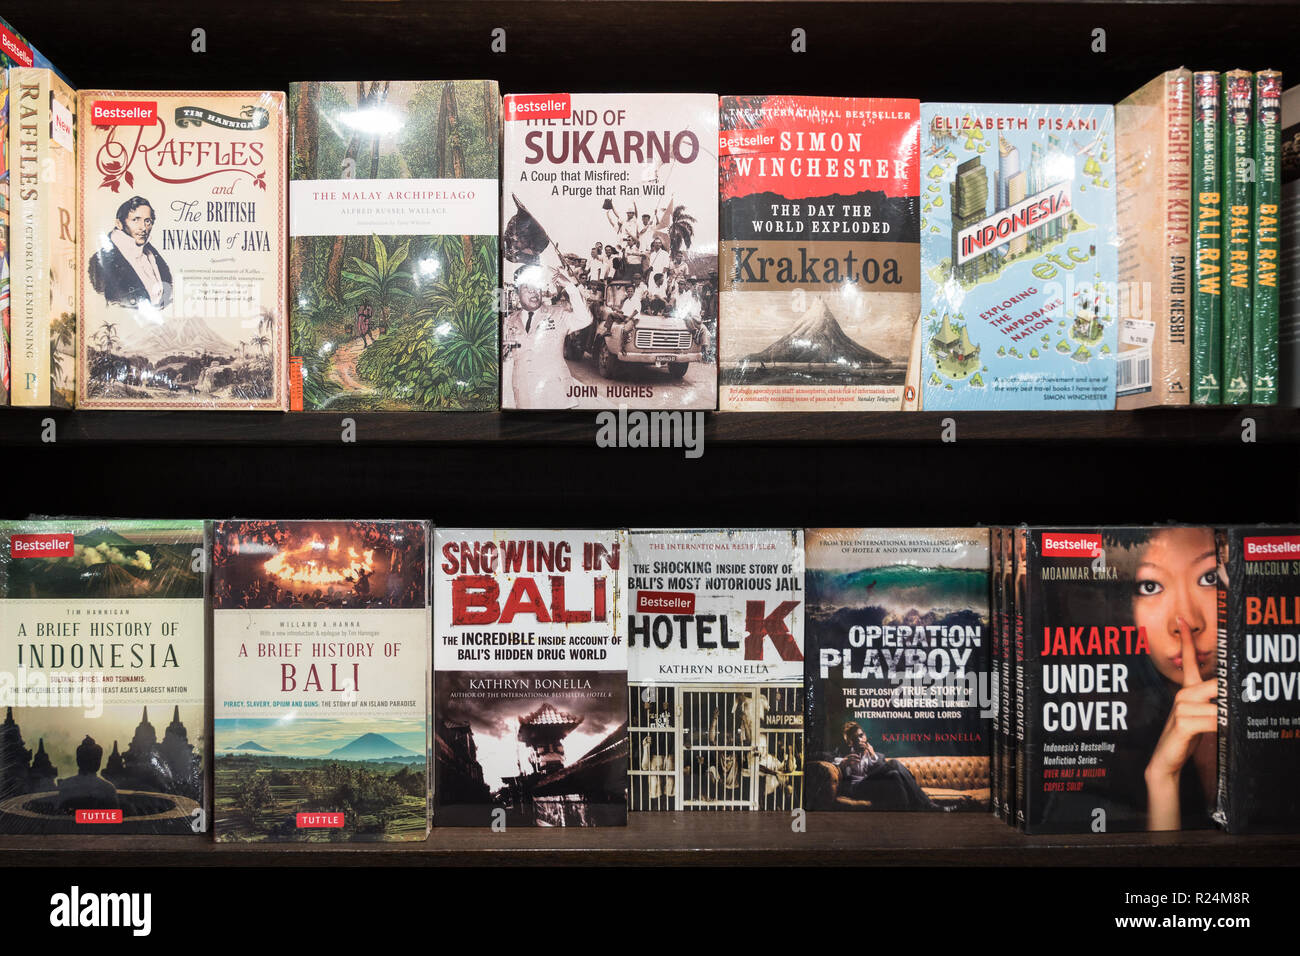 Jakarta, Indonesia - November 13 2018: Various books about Indonesia history, politics and social issues are displayed in a modern bookstore. Stock Photo